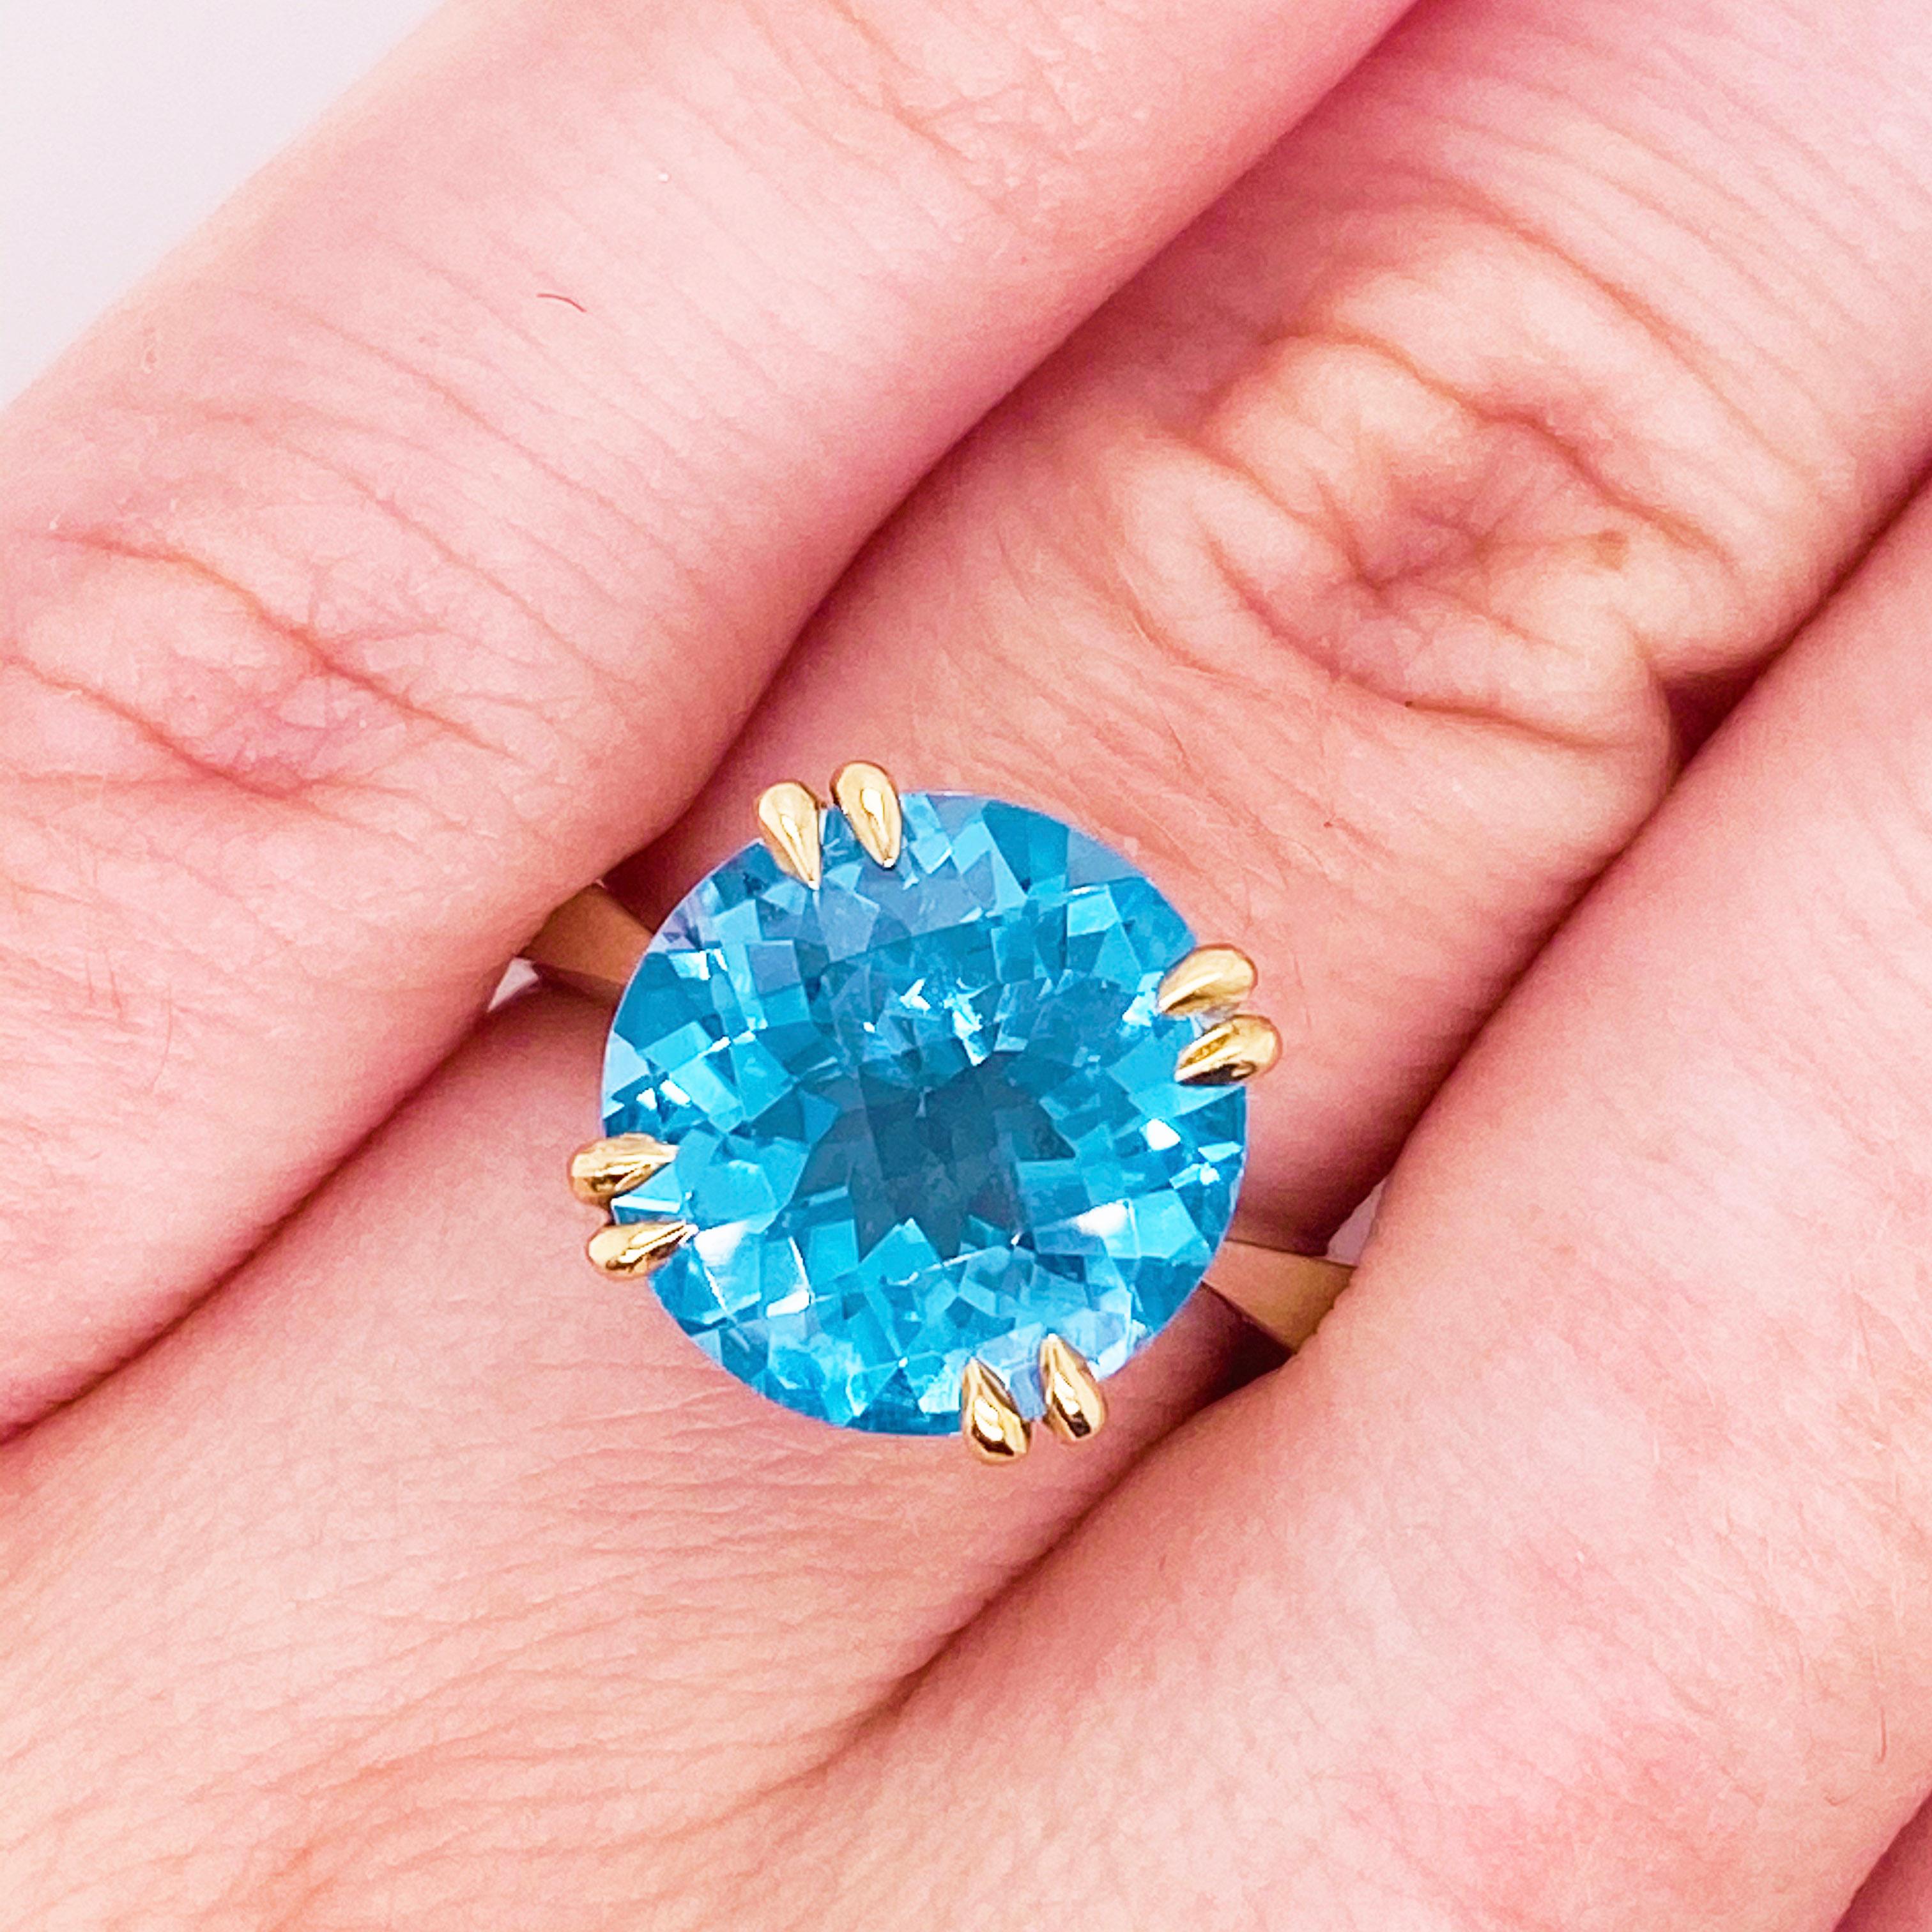 These stunning bright blue topaz set in polished mixed metals of 14k yellow gold with a sterling band provides a look that is very classic and modern at the same time! This ring is very fashionable and can add a touch of style to any outfit, yet it